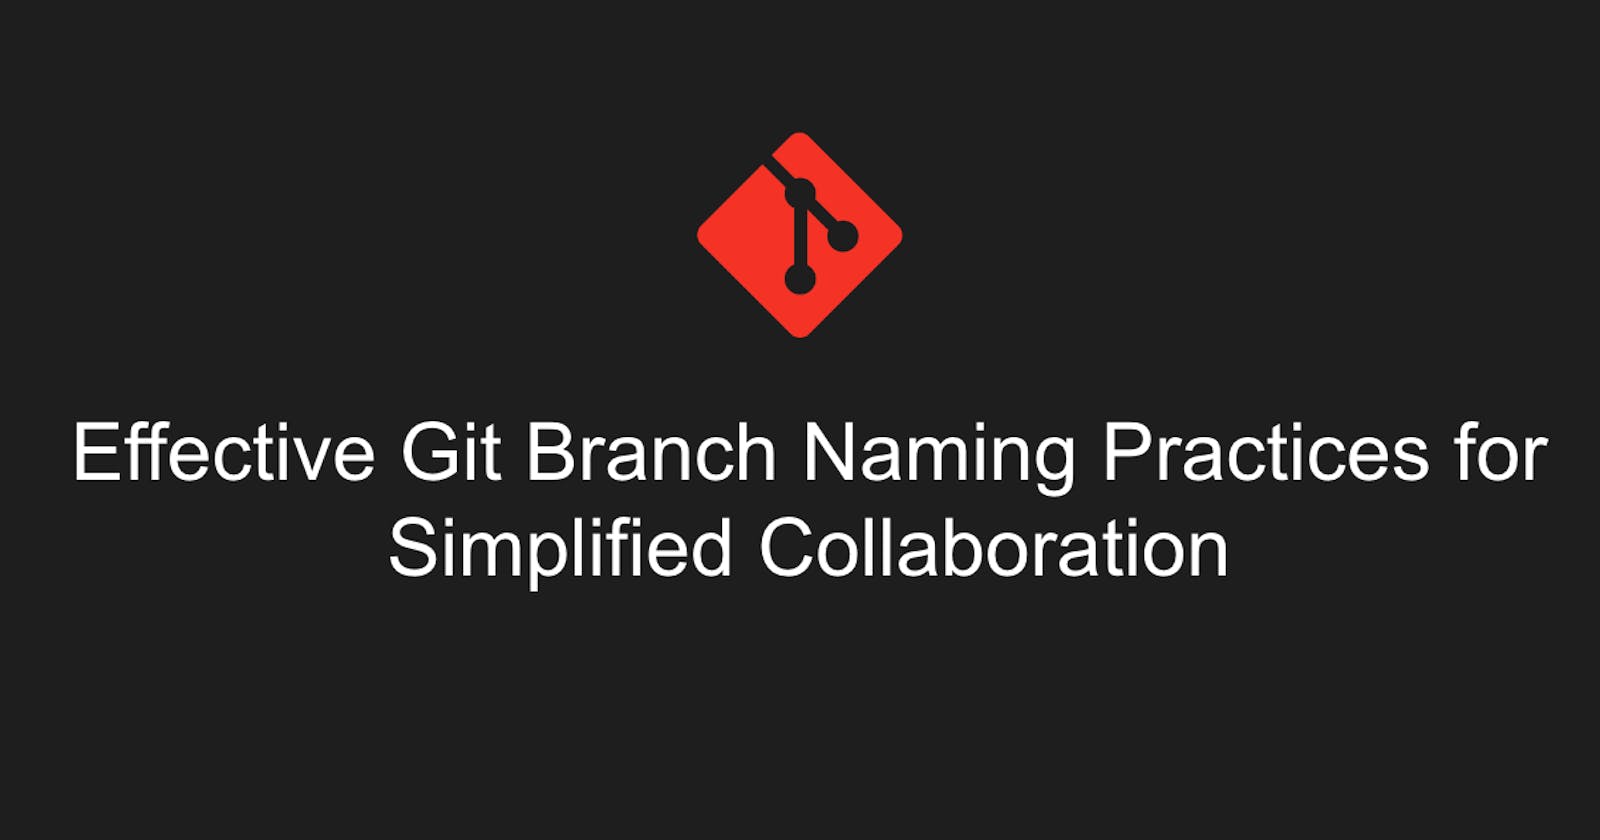 Effective Git Branch Naming Practices for Simplified Collaboration